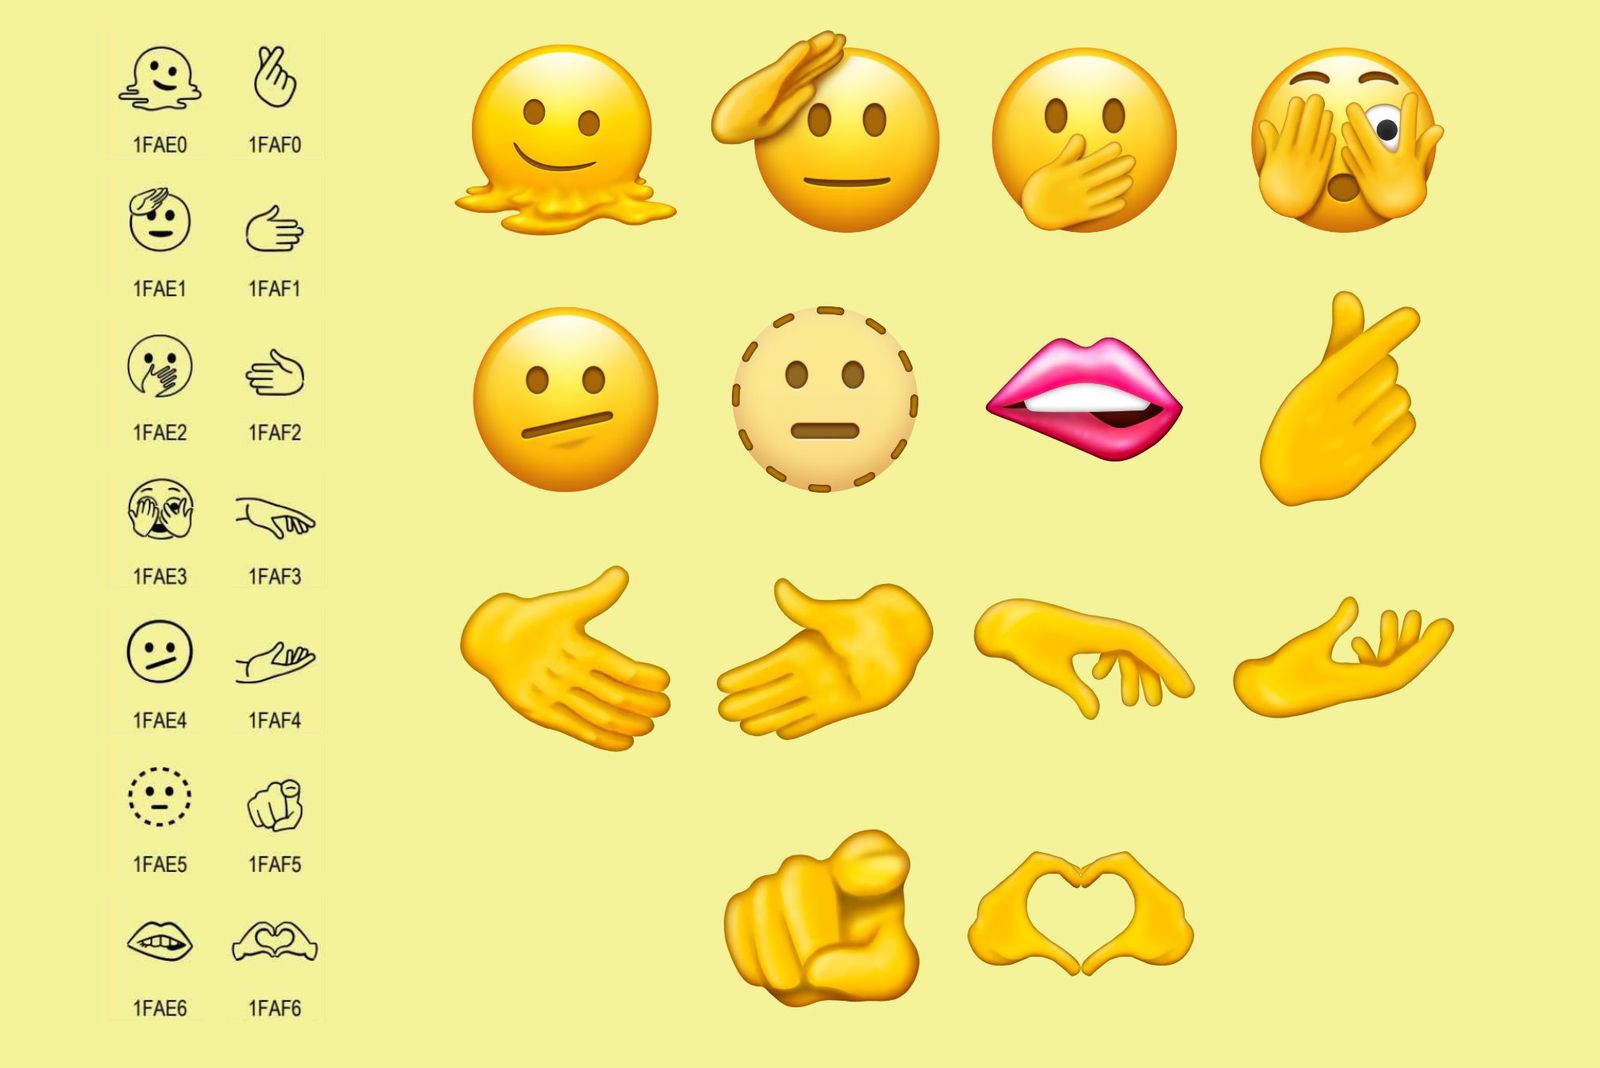 Next Emojis Will Include Melting Face, Biting Lip, Heart Hands, Troll